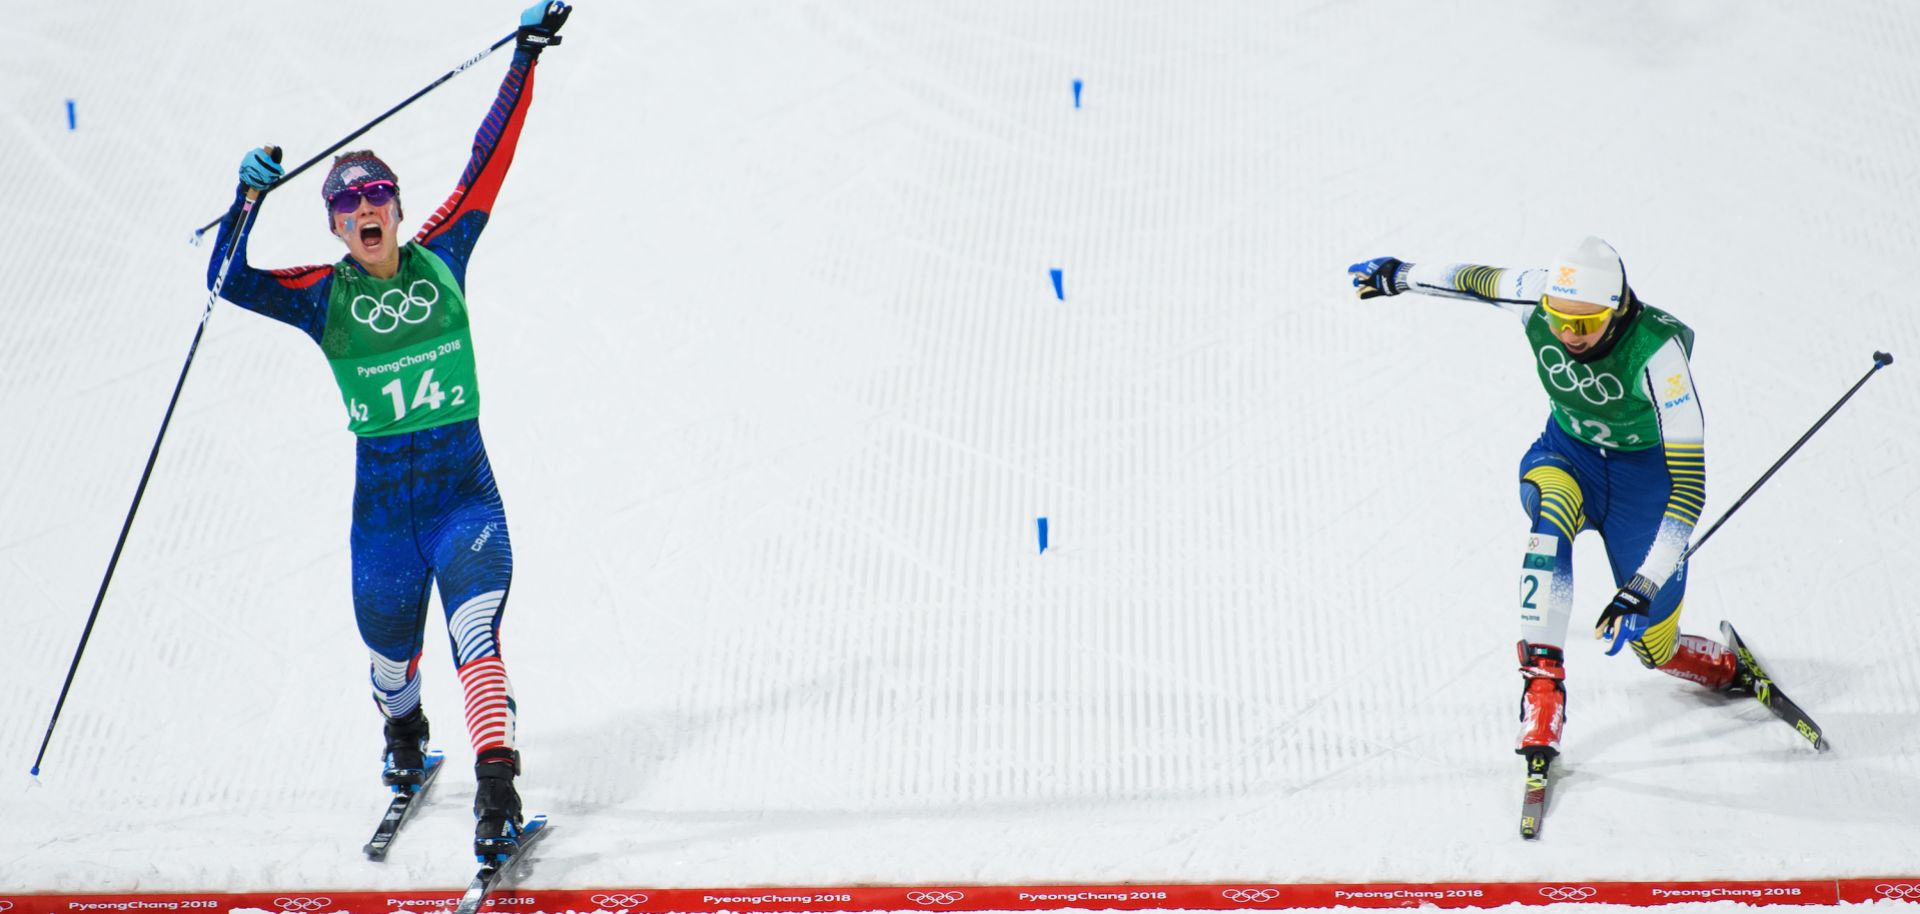 U.S. cross-country skier Jessica Diggins (L) crosses the finish line ahead of Swedish skier Stina Nilsson to win gold in the sprint event at the Winter Olympics in Pyeongchang, South Korea.